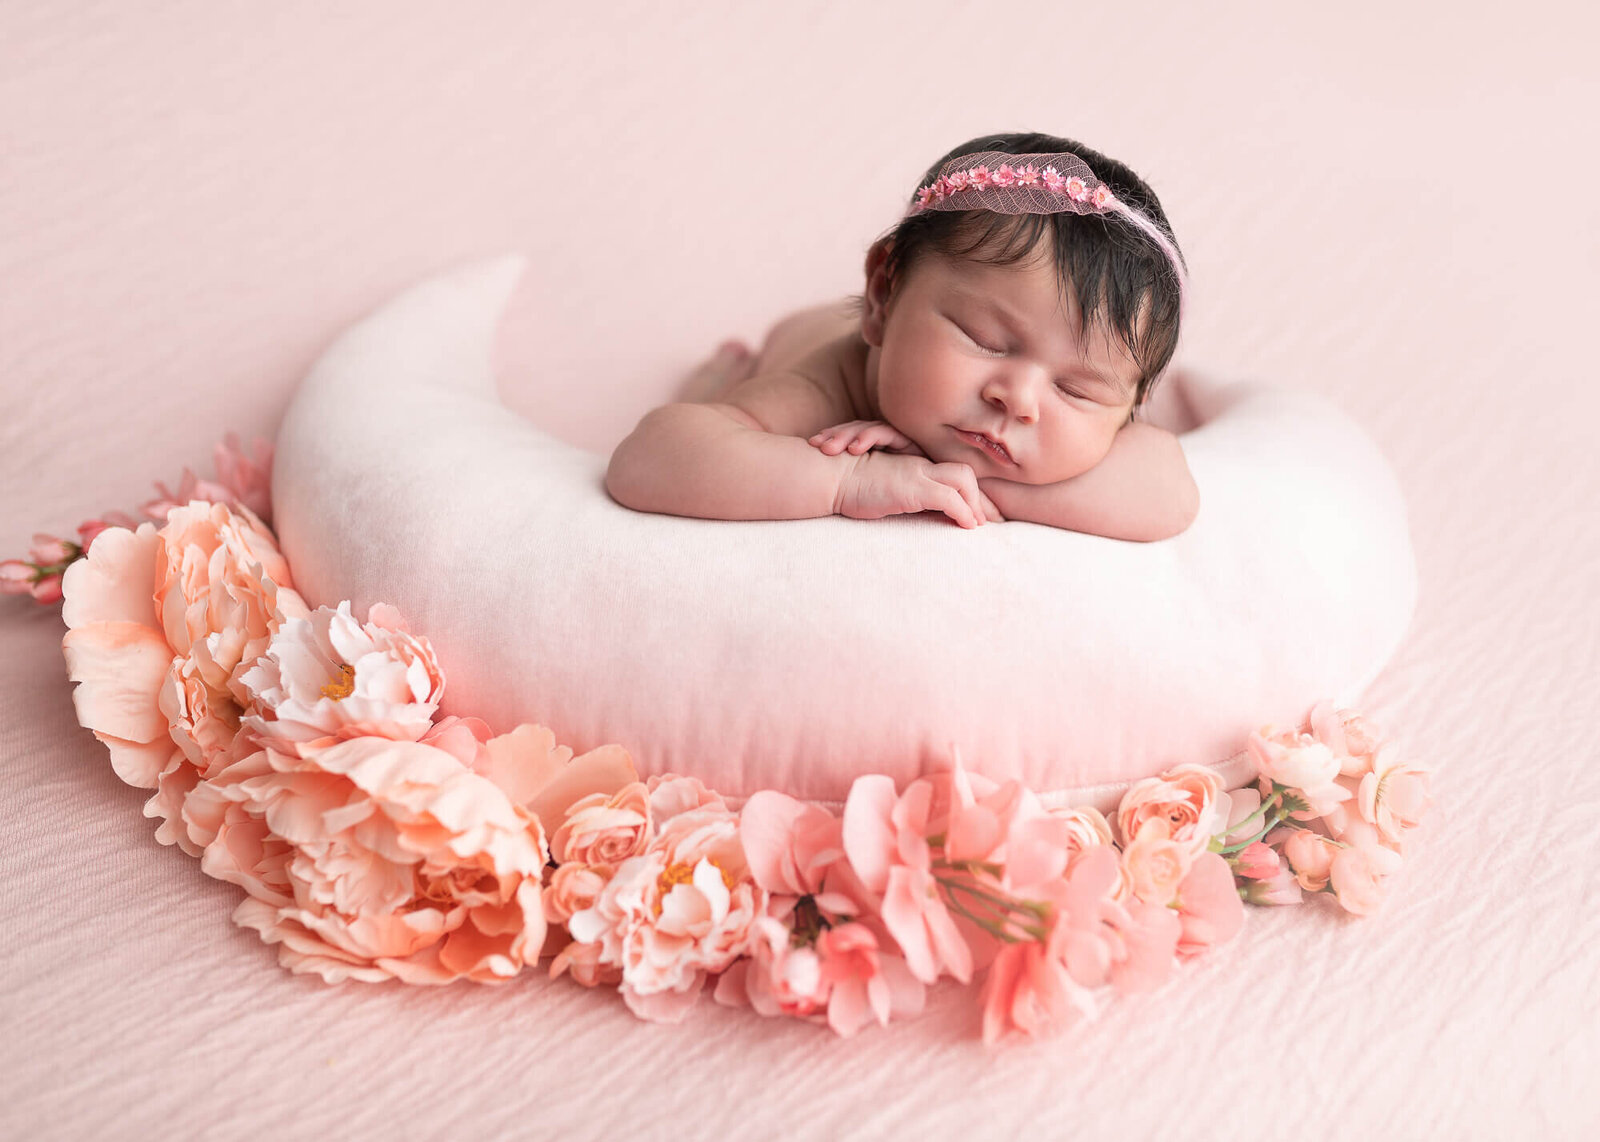 Baby girl photographed on pink with flowers